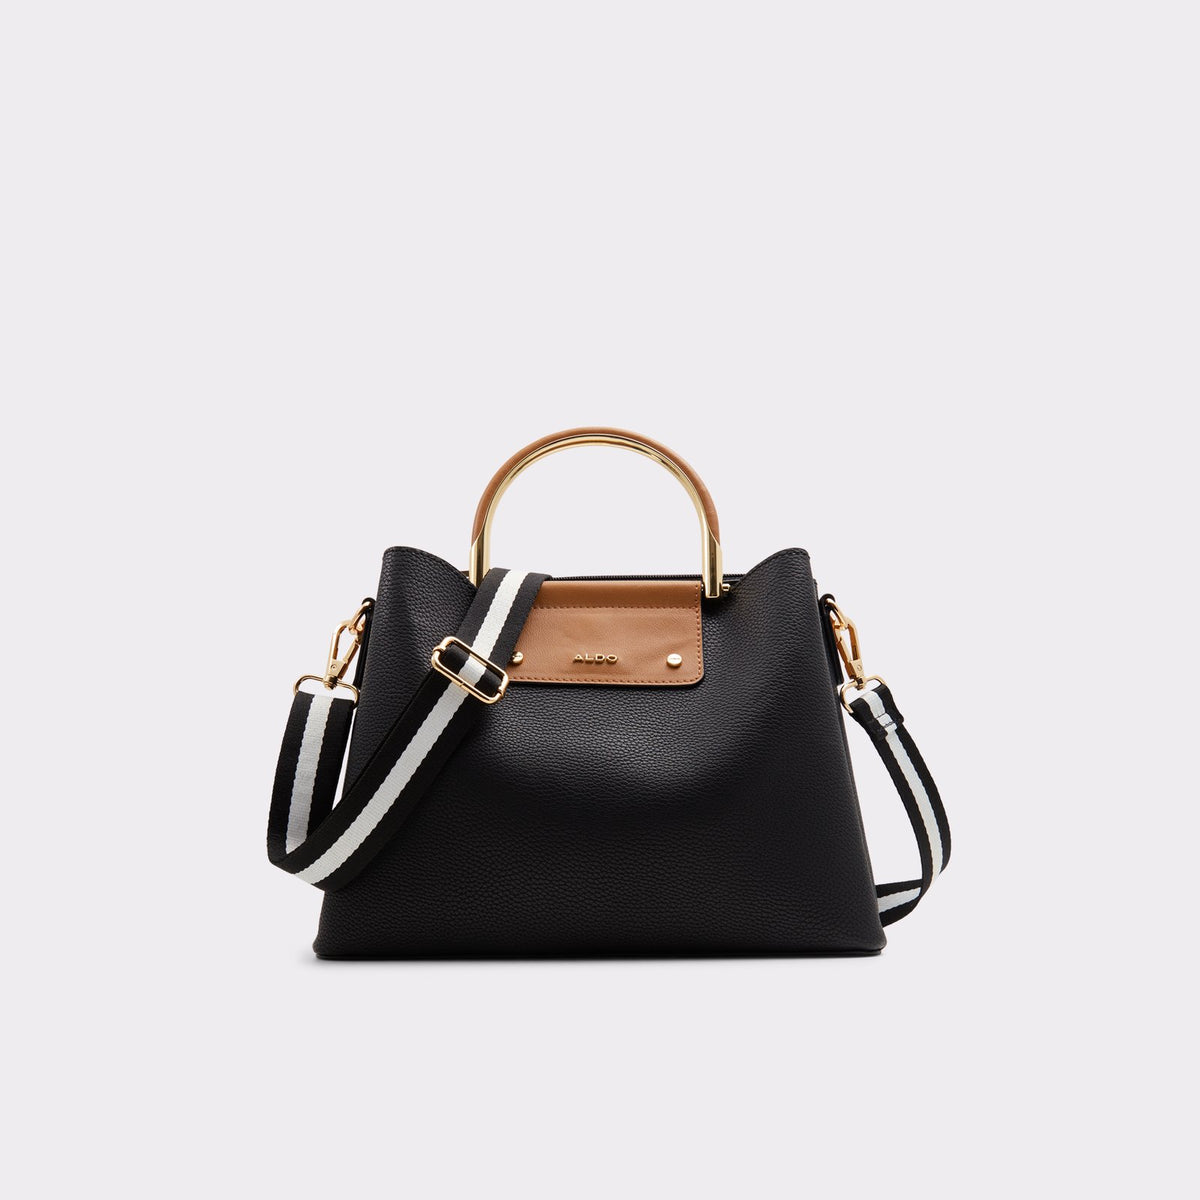 ALDO Shoes - Meet the Myeverything bag. The ultimate tote